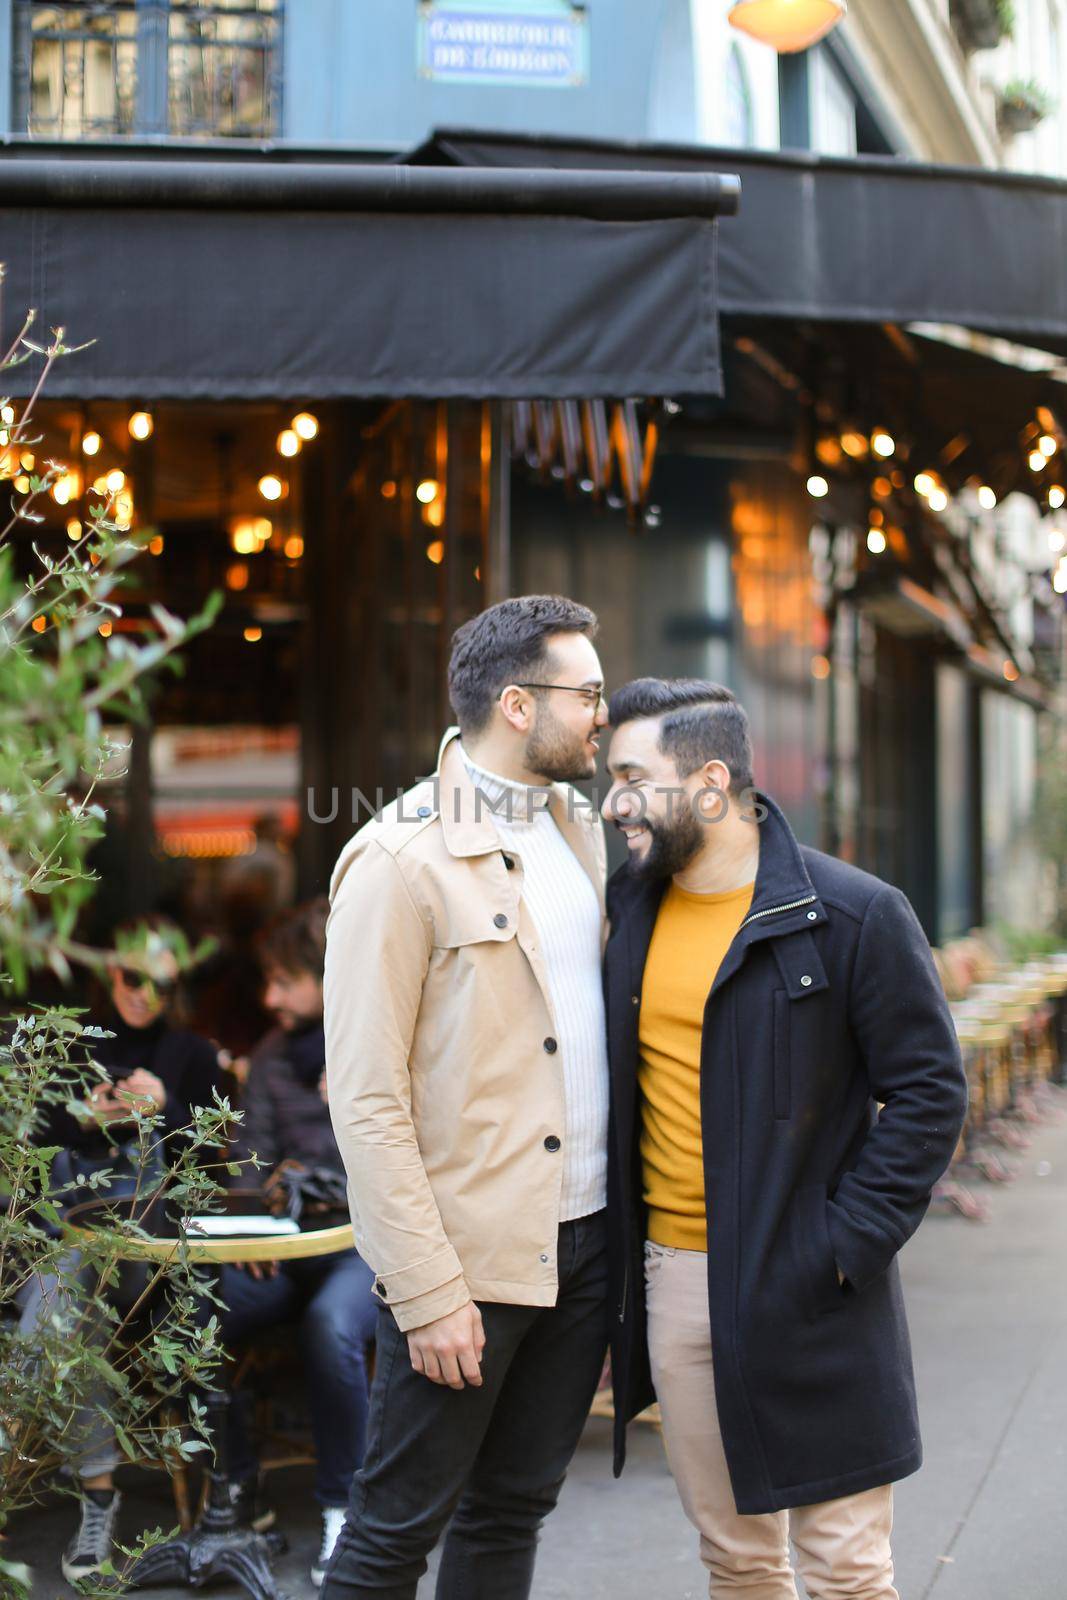 Two young gays standing at street cafe and smiling. Concept of same sex couple and male friendship.